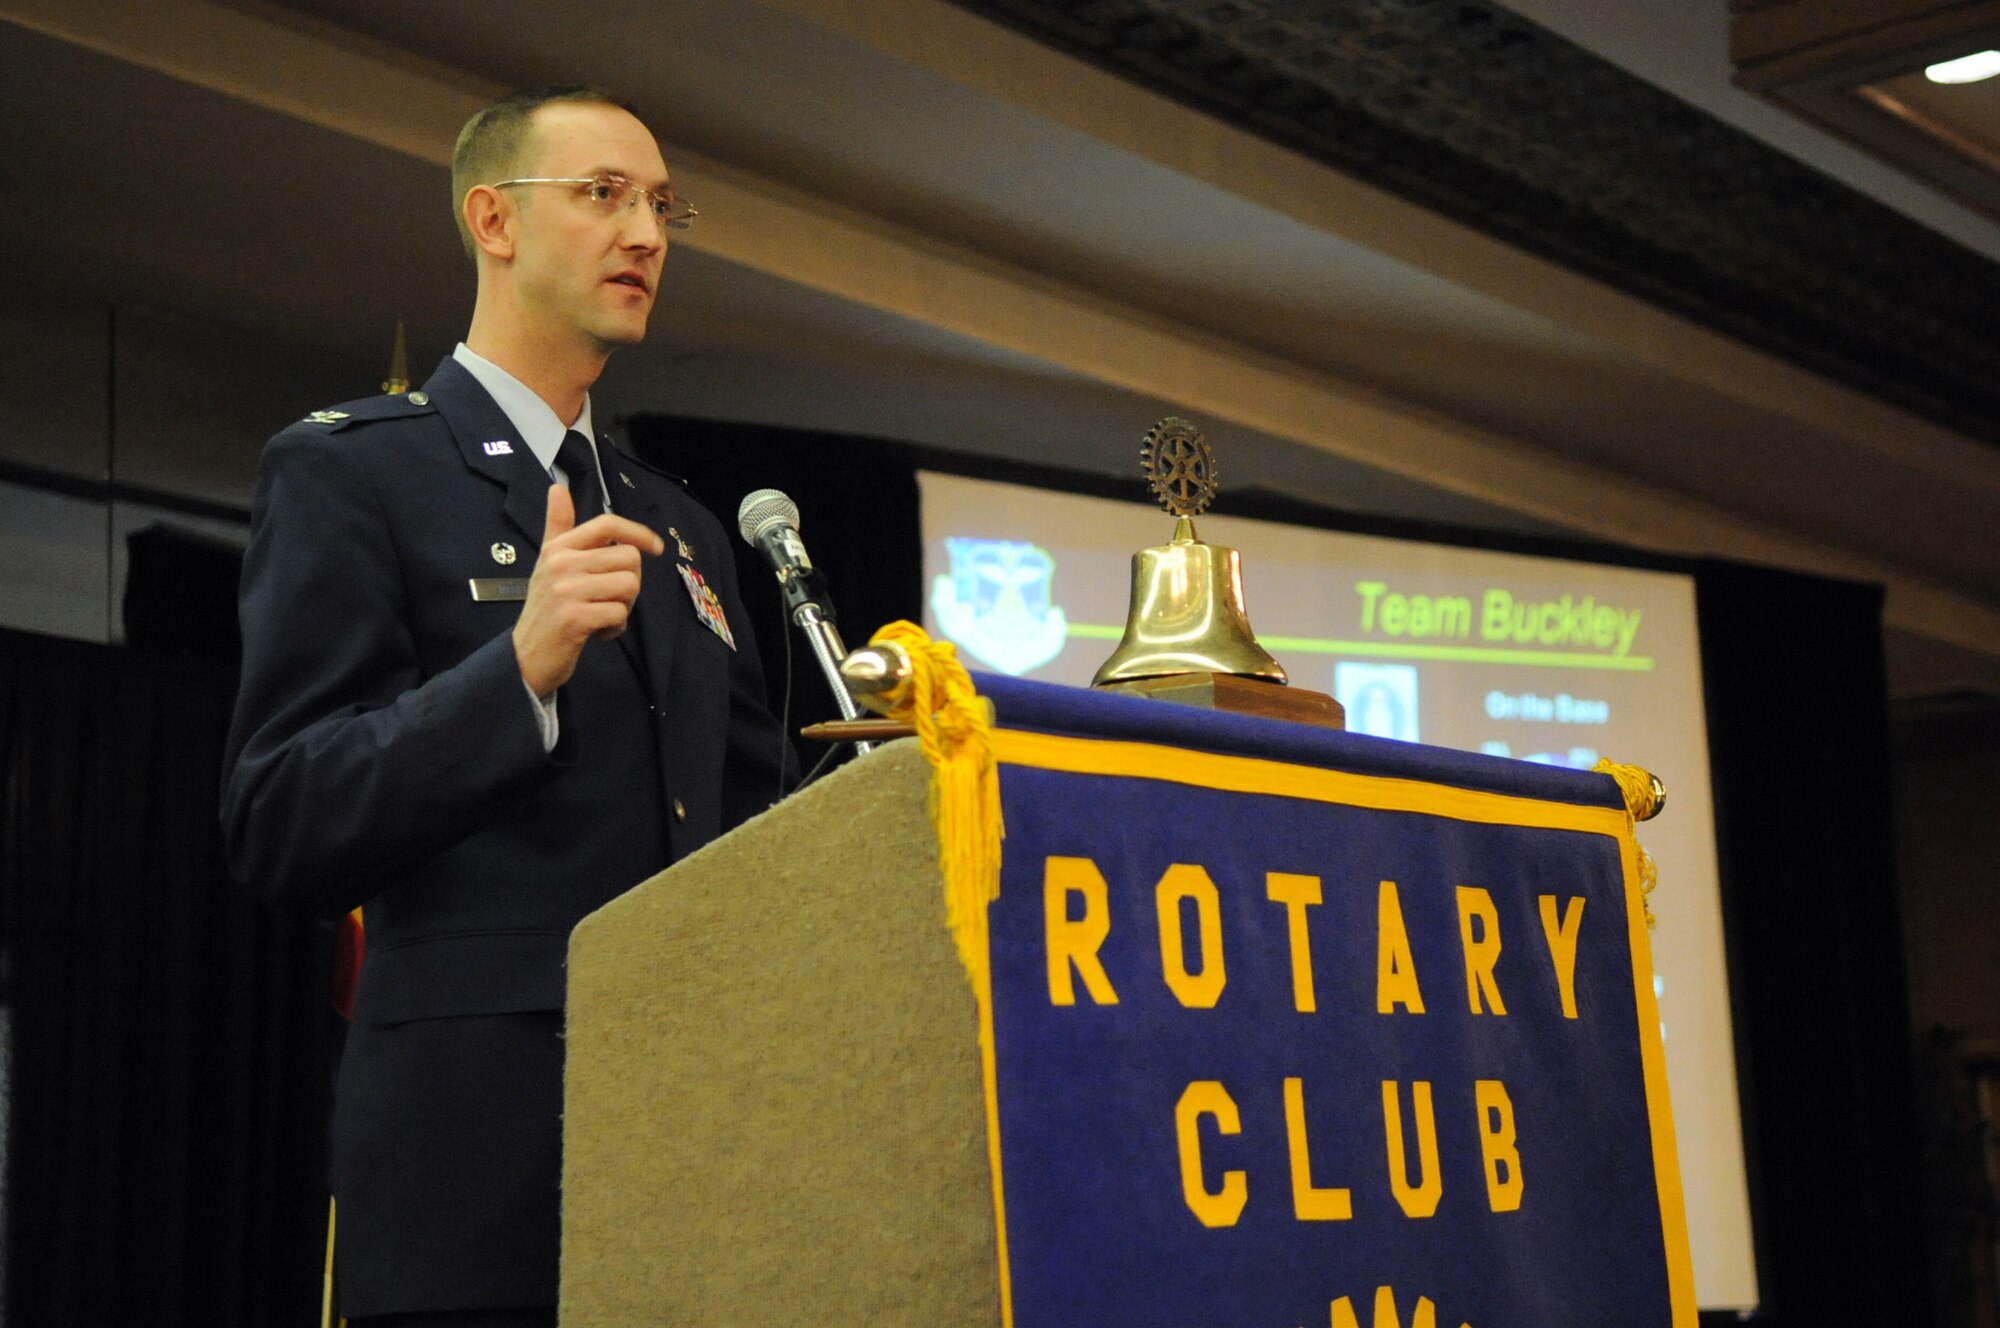 AURORA, Colo. -- Col. Wayne McGee, 460th Space Wing Commander, gives the State of the Base address to a joint session of the Rotary Club of Aurora and the Aurora Chamber Defense Council at the Red Lion Hotel here Jan. 14. In 2008 Buckley injected more than $1 billion into the local economy for the fifth straight year. (U.S. Air Force photo by Senior Airman John Easterling)